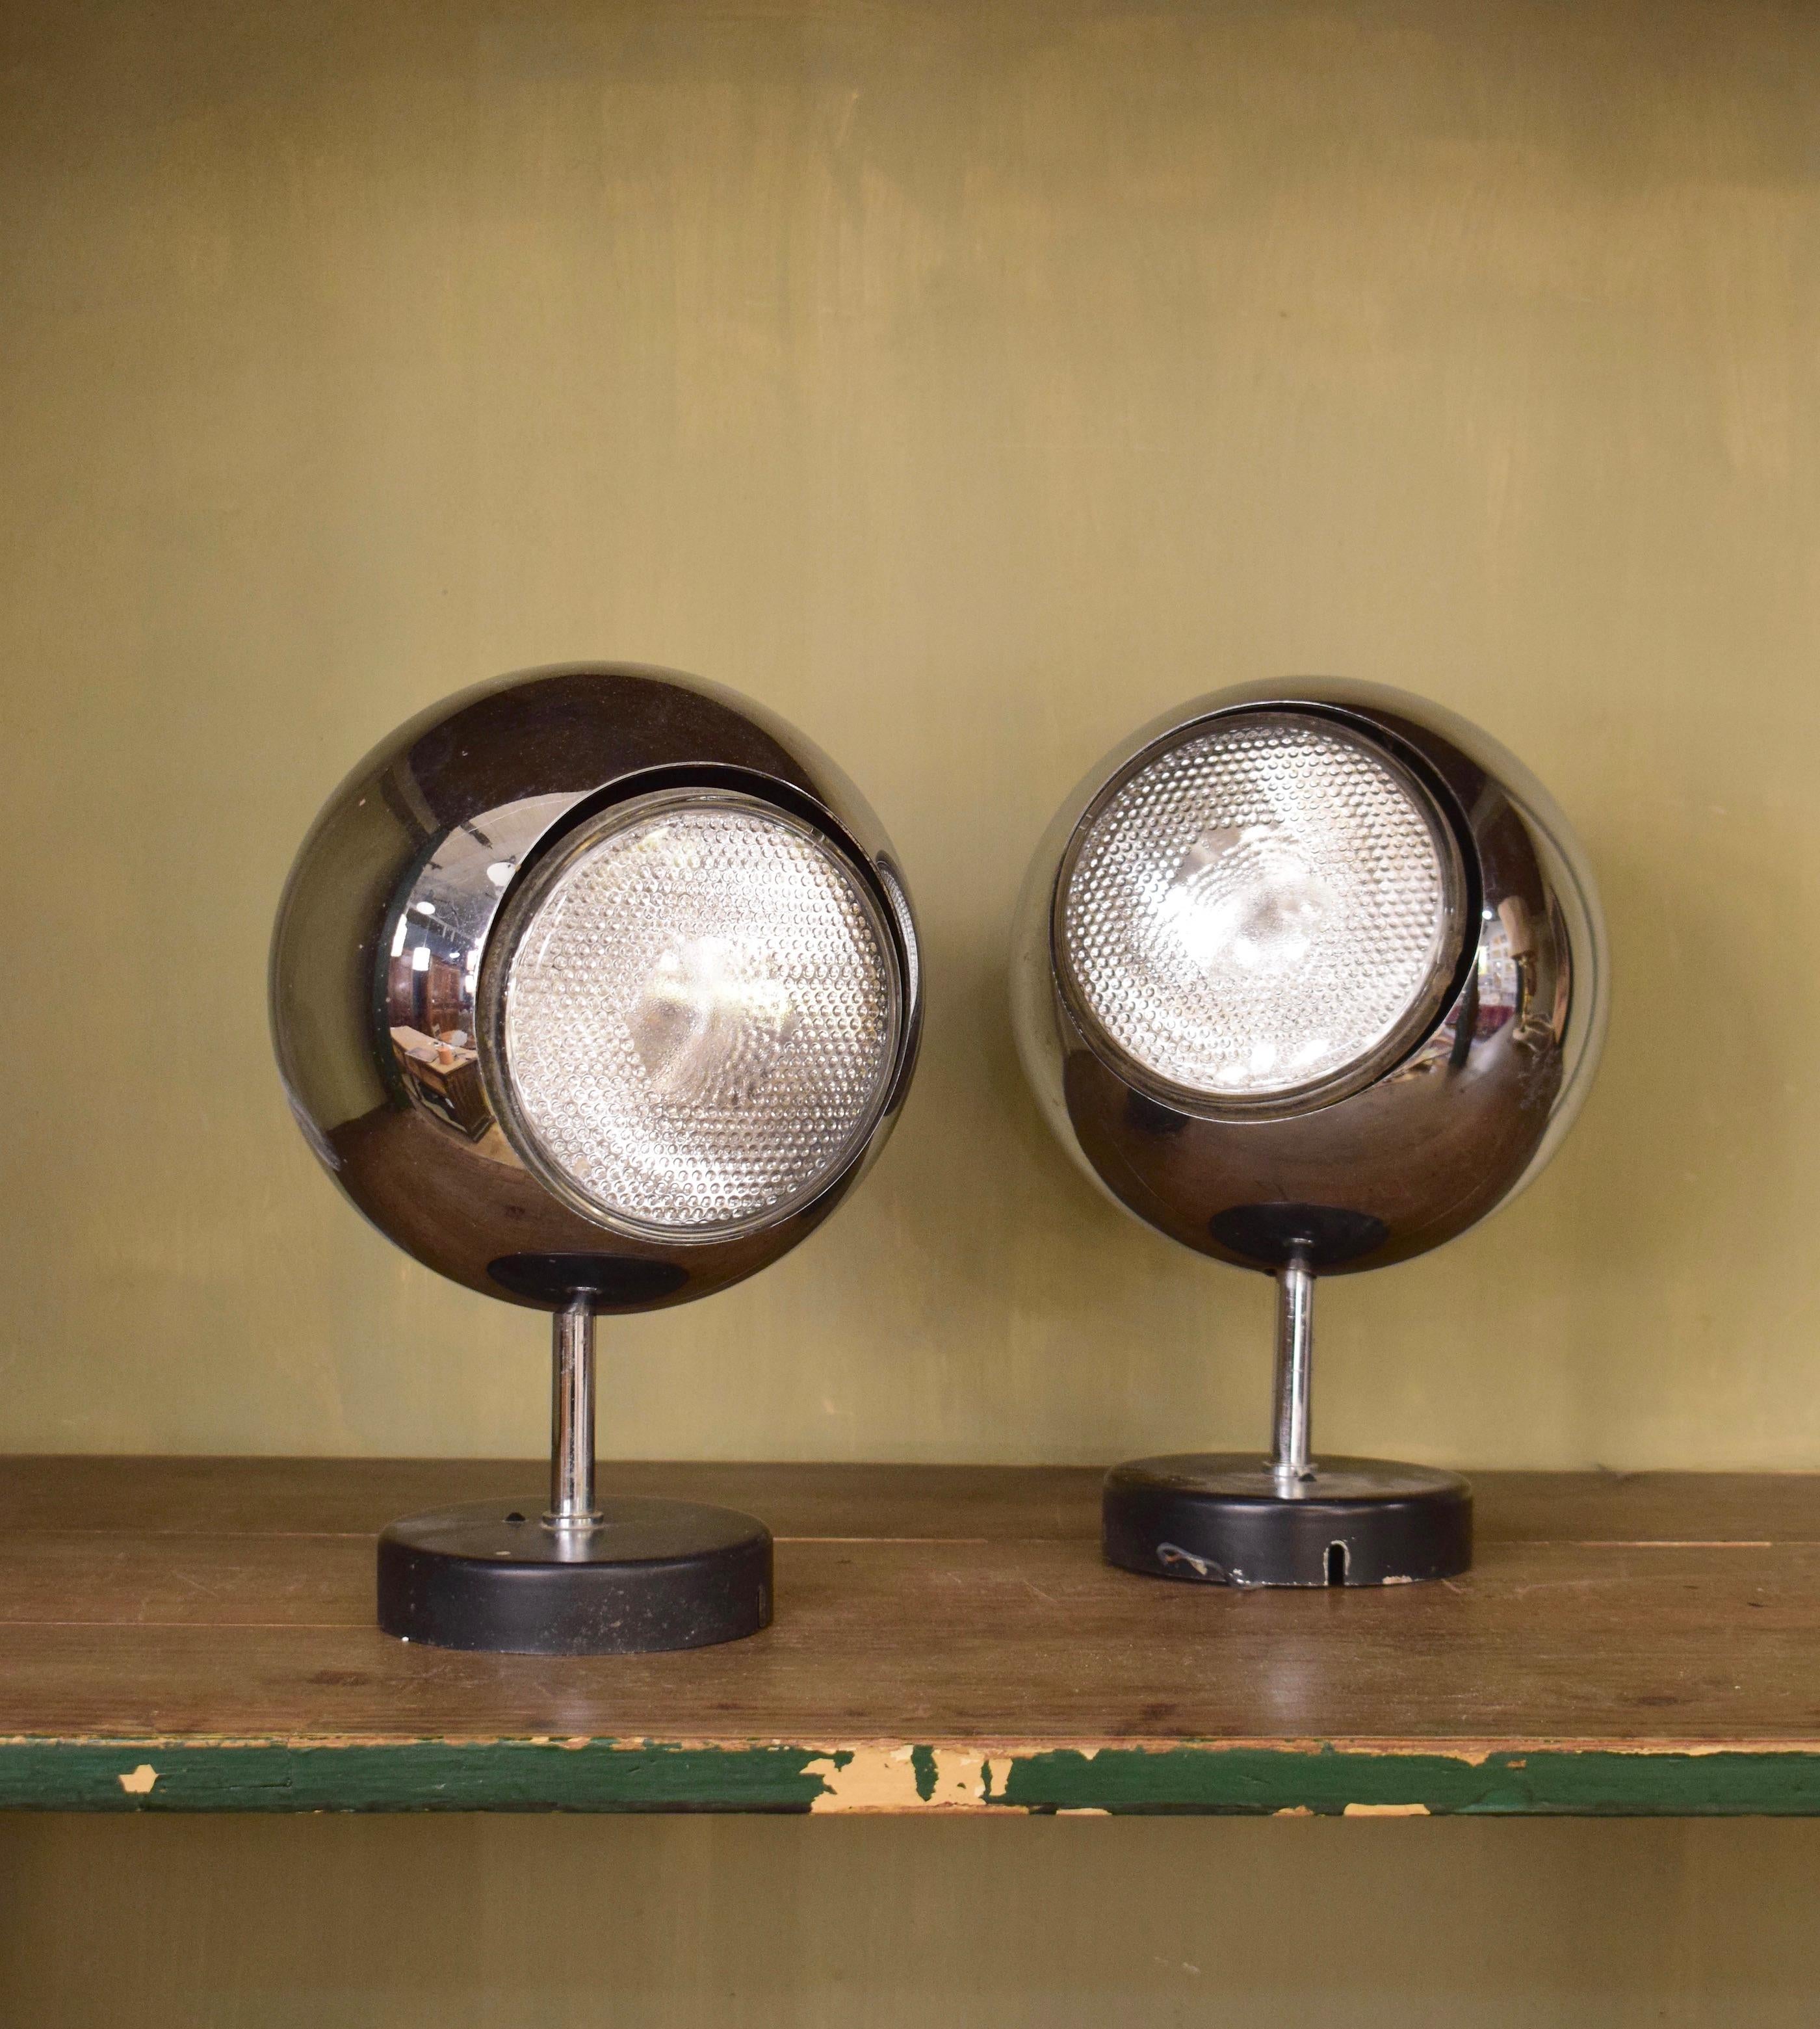 A pair of 1970s chrome ball desk lamps from the 1970s. They are in overall good condition with a little light scuffing. Each lamp can be adjusted to point in a desired direction. They are very playful objects.